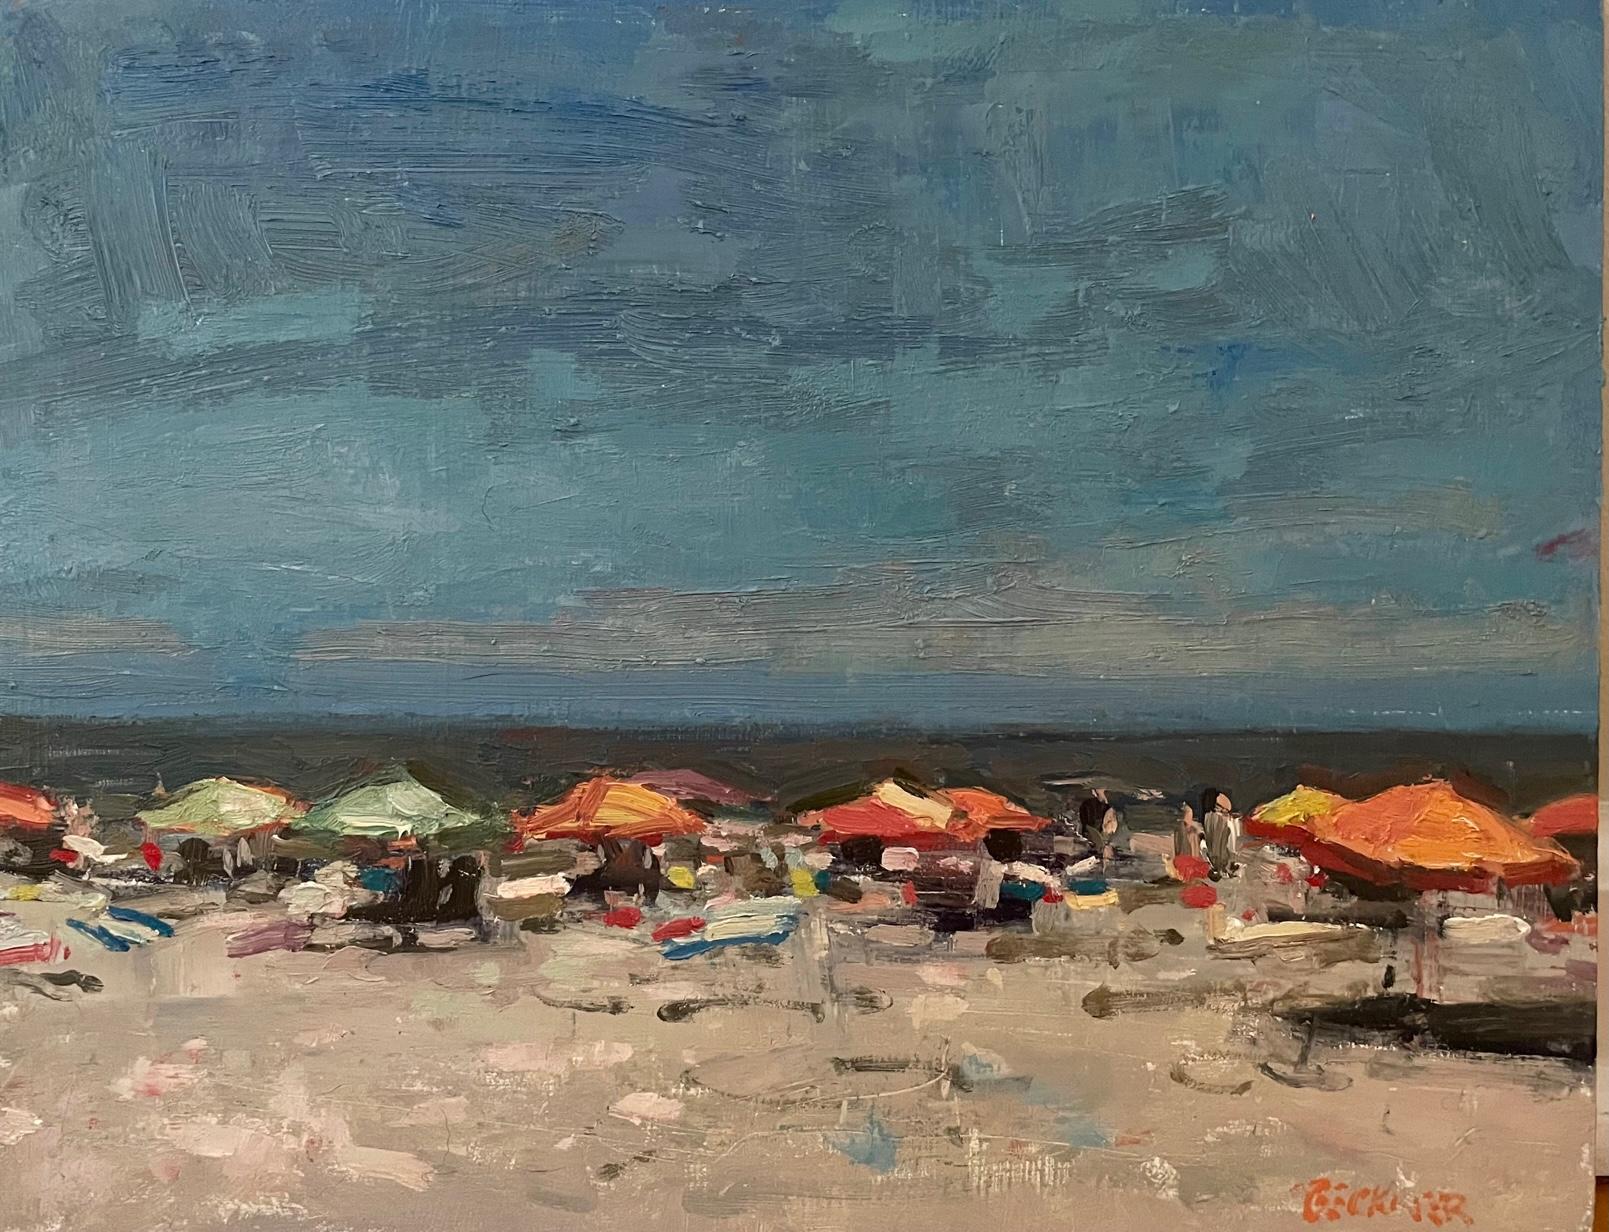 Gray Umbrella  is an example of the bright colors that Beckner uses in his paintings. The Gray Umbrella series was painted in Dana Point California Jim Beckner just finished a series of beach paintings. All of them can be seen below and available.